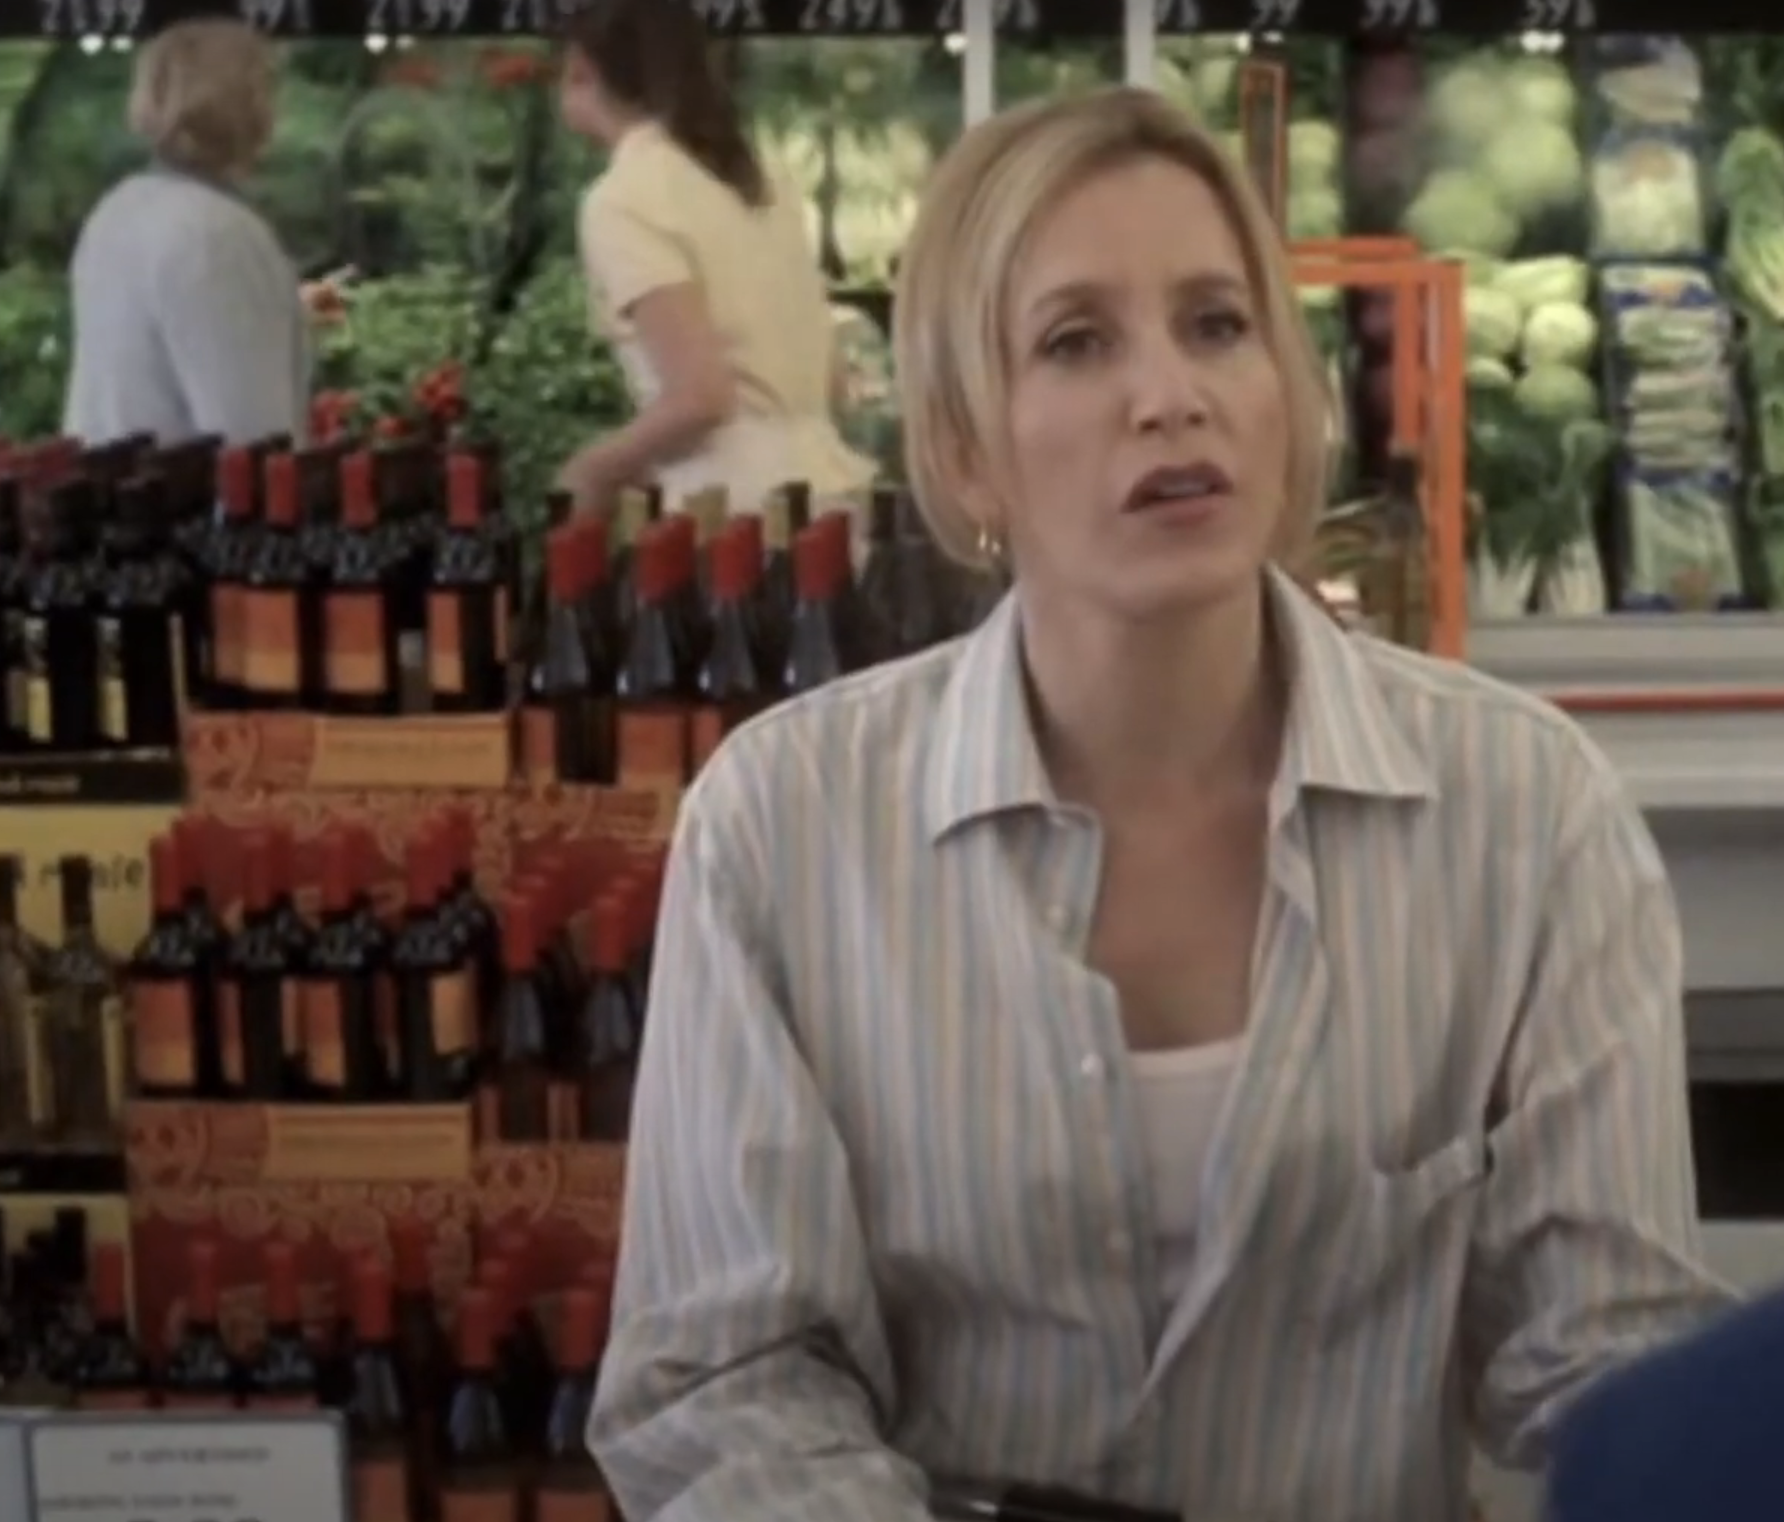 Woman in a striped shirt shopping at a grocery store with produce and wine shelves in the background